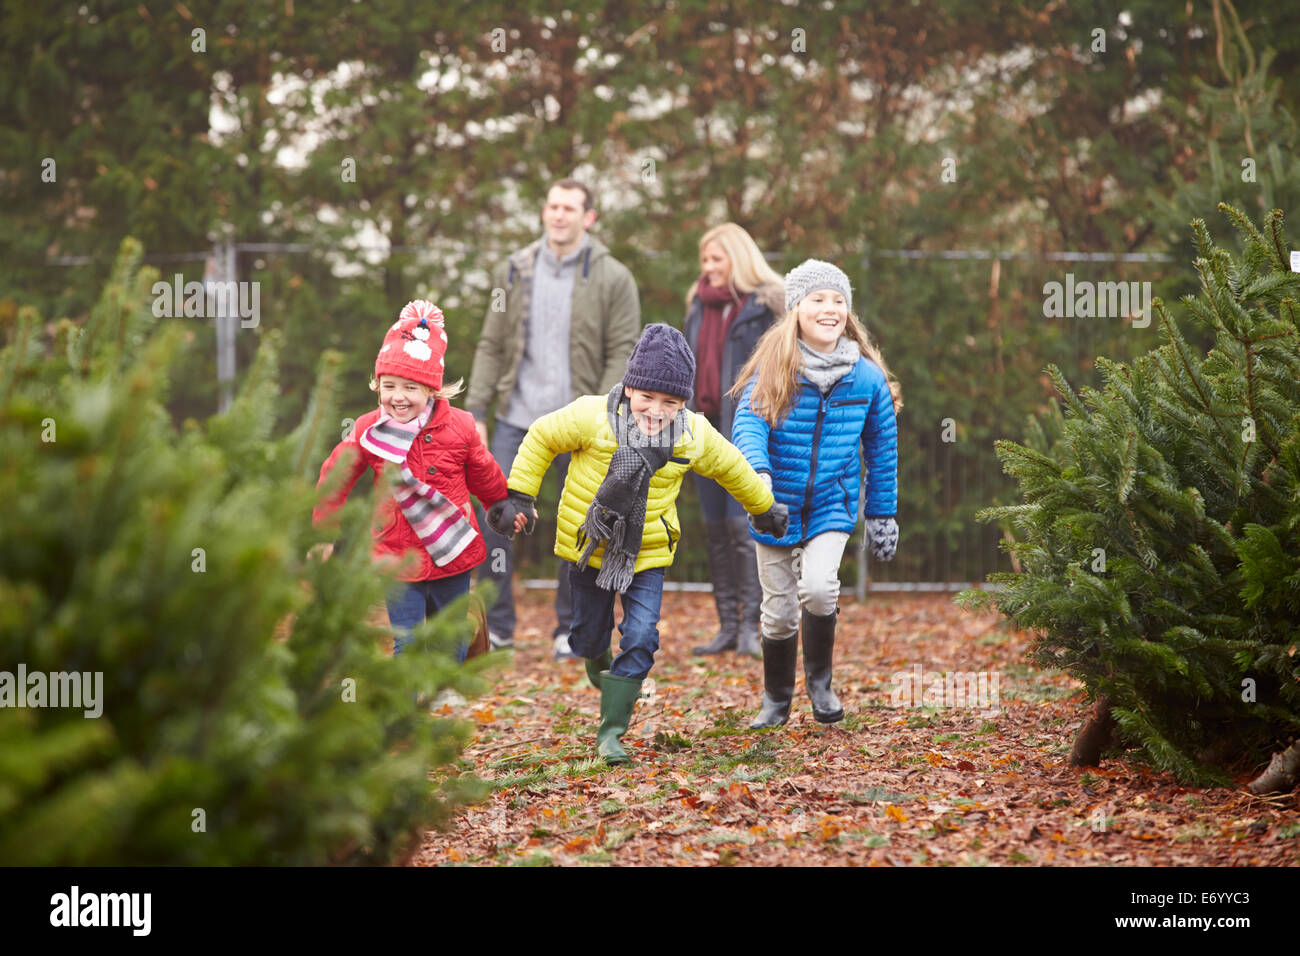 Outdoor Family Choosing Christmas Tree Together Stock Photo